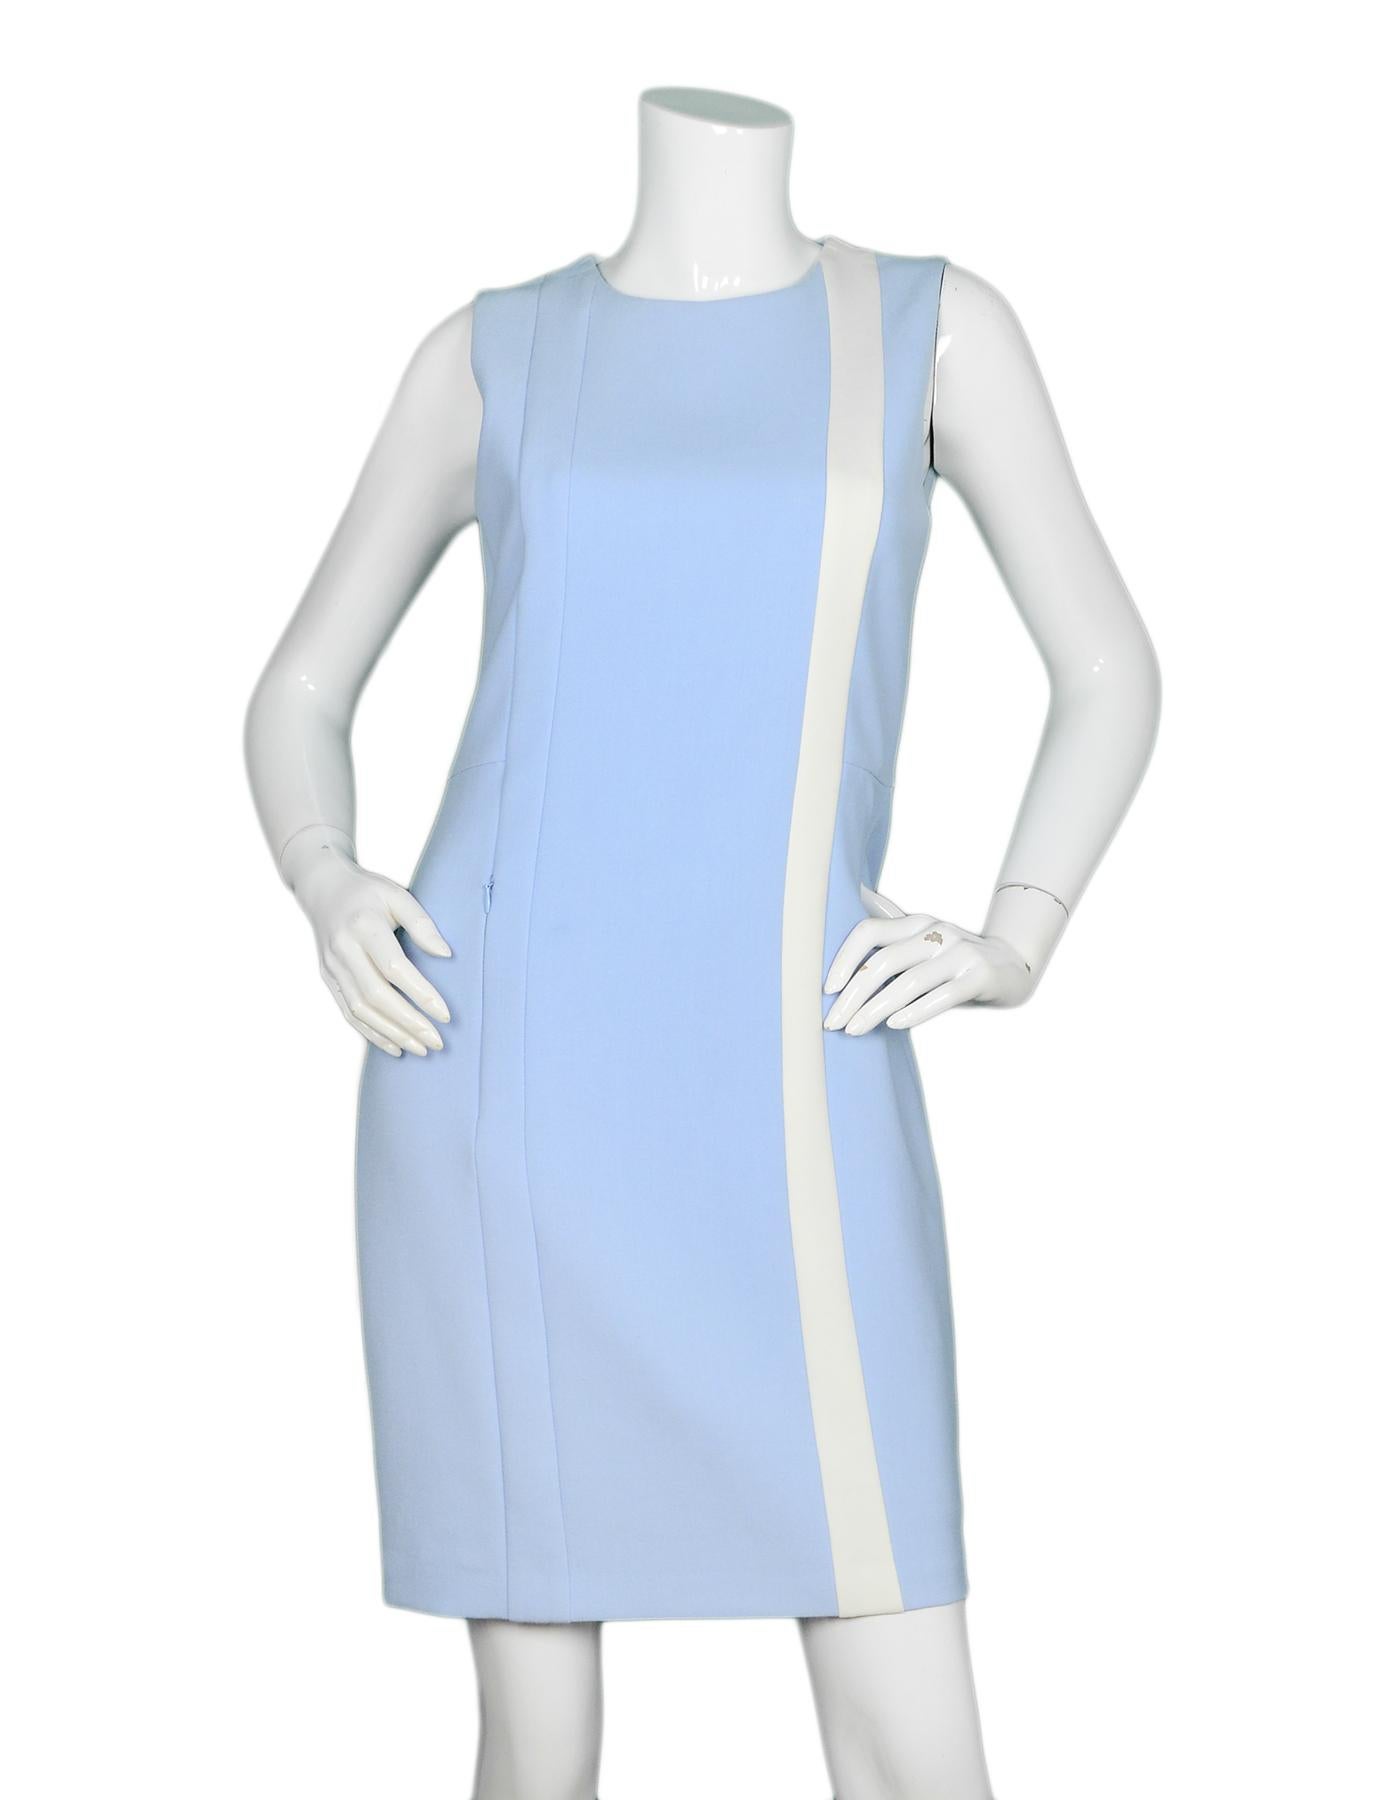 Akris Blue Sleeveless Dress w/ White Stripe sz 6

Made In: Romania
Color: Blue
Materials: 63% polyester, 27% viscose, 7% cotton 3% elastane
Lining: 100% viscose
Opening/Closure: Hidden back zipper closure 
Overall Condition: Excellent pre-owned